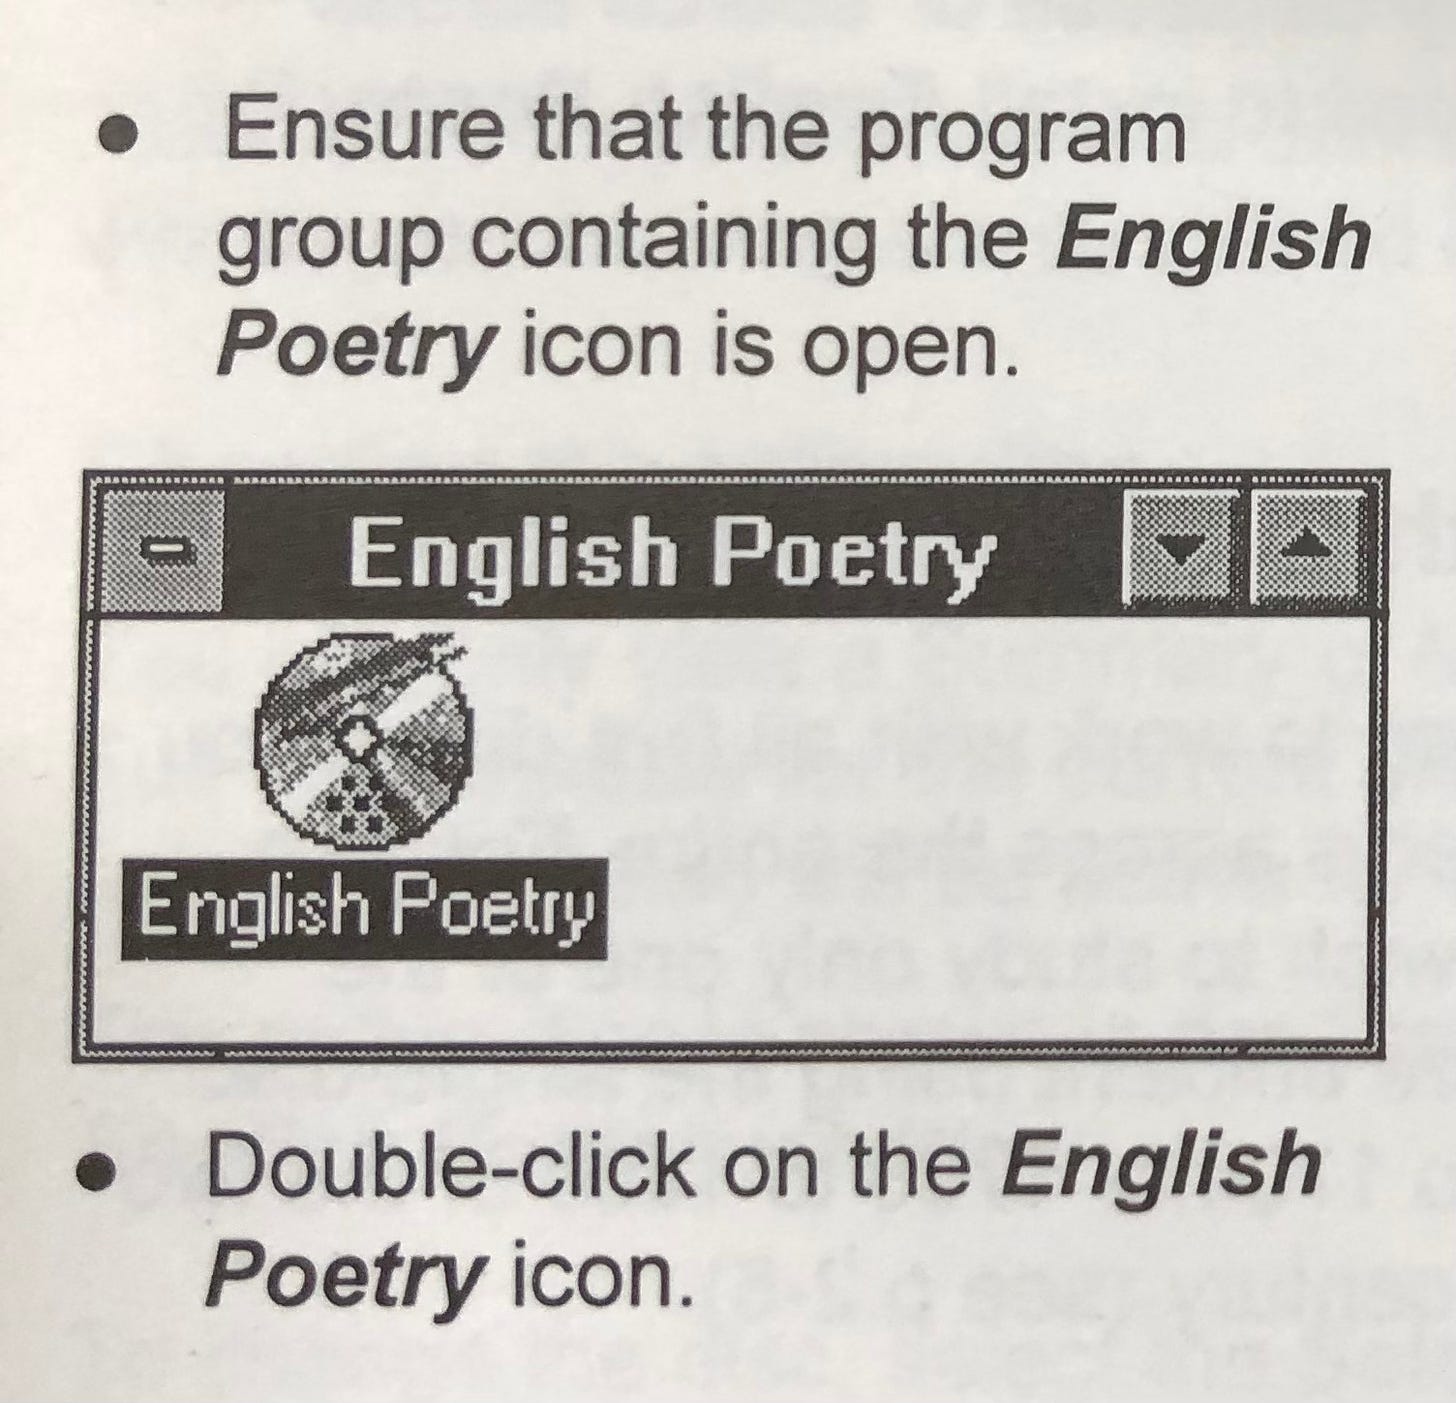 Extract from English Poetry database user manual, giving instructions for how to open the programme: 'Double-click on the English Poetry icon'